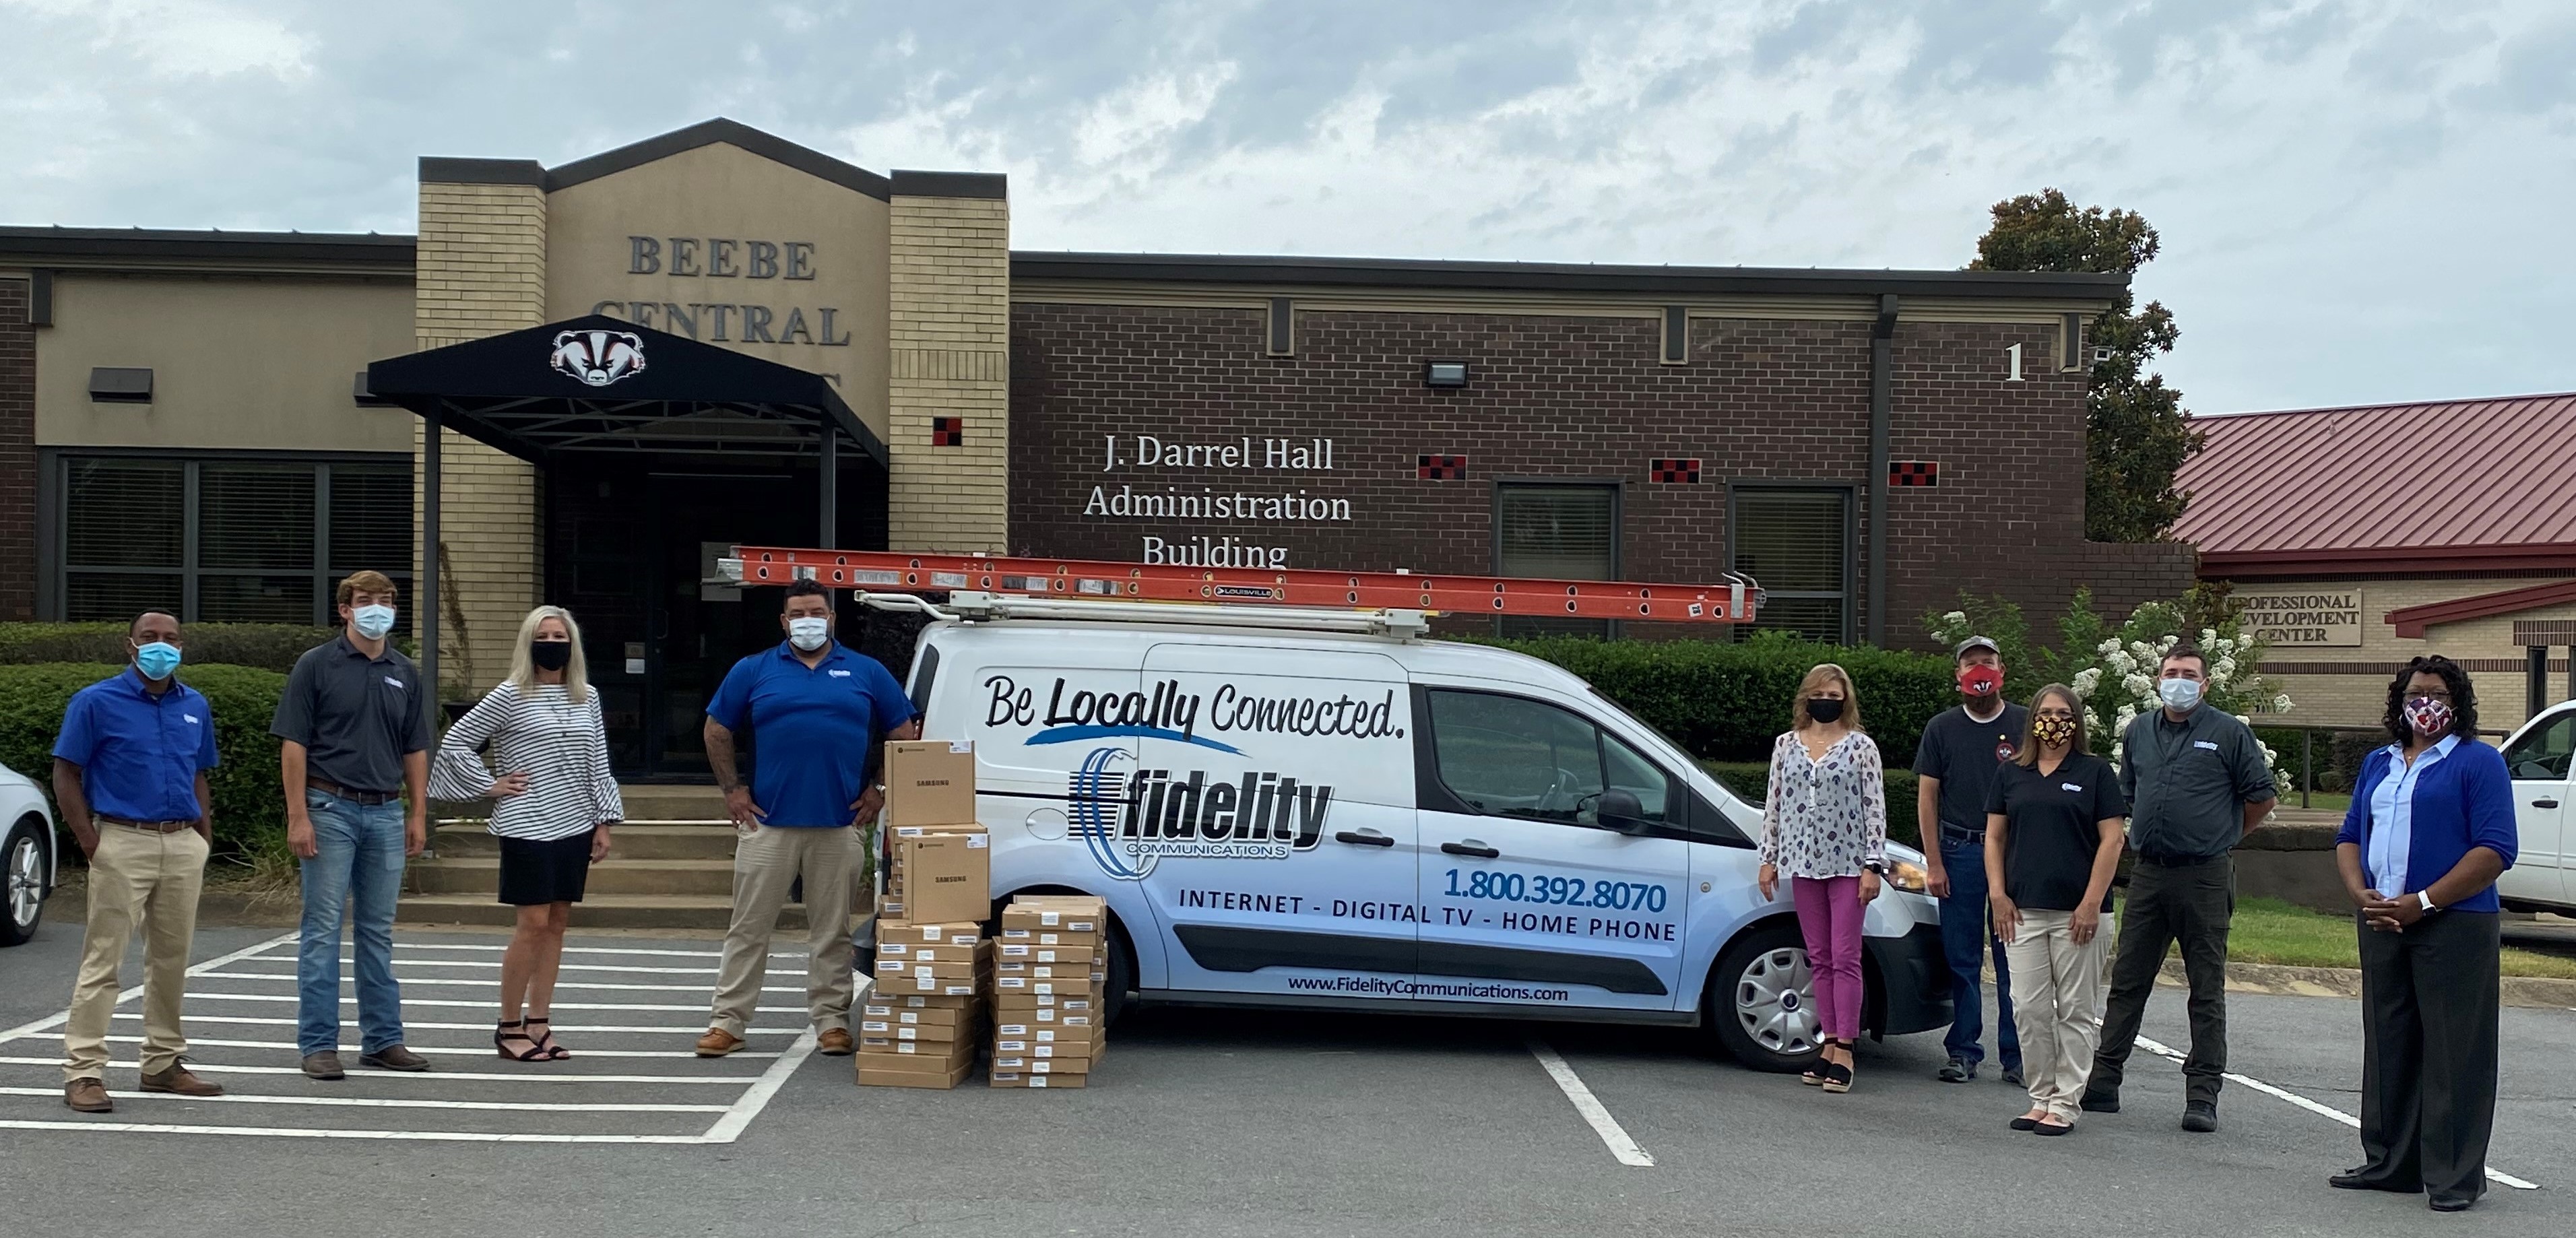 Fidelity Communications with Beebe Elementary School personnel